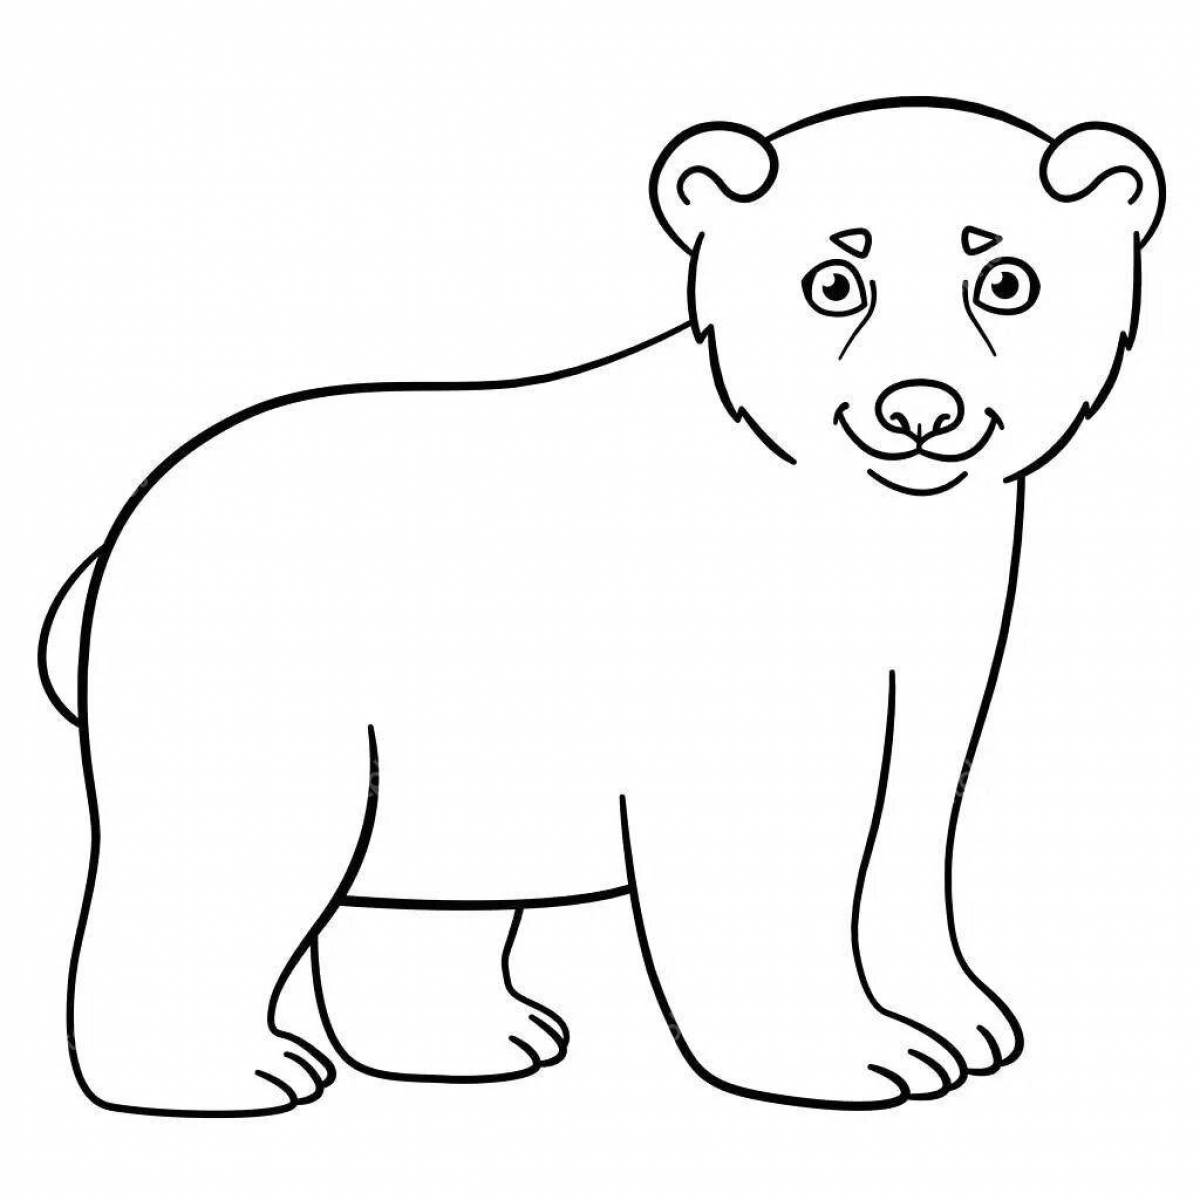 Glorious polar bear coloring for children 2-3 years old